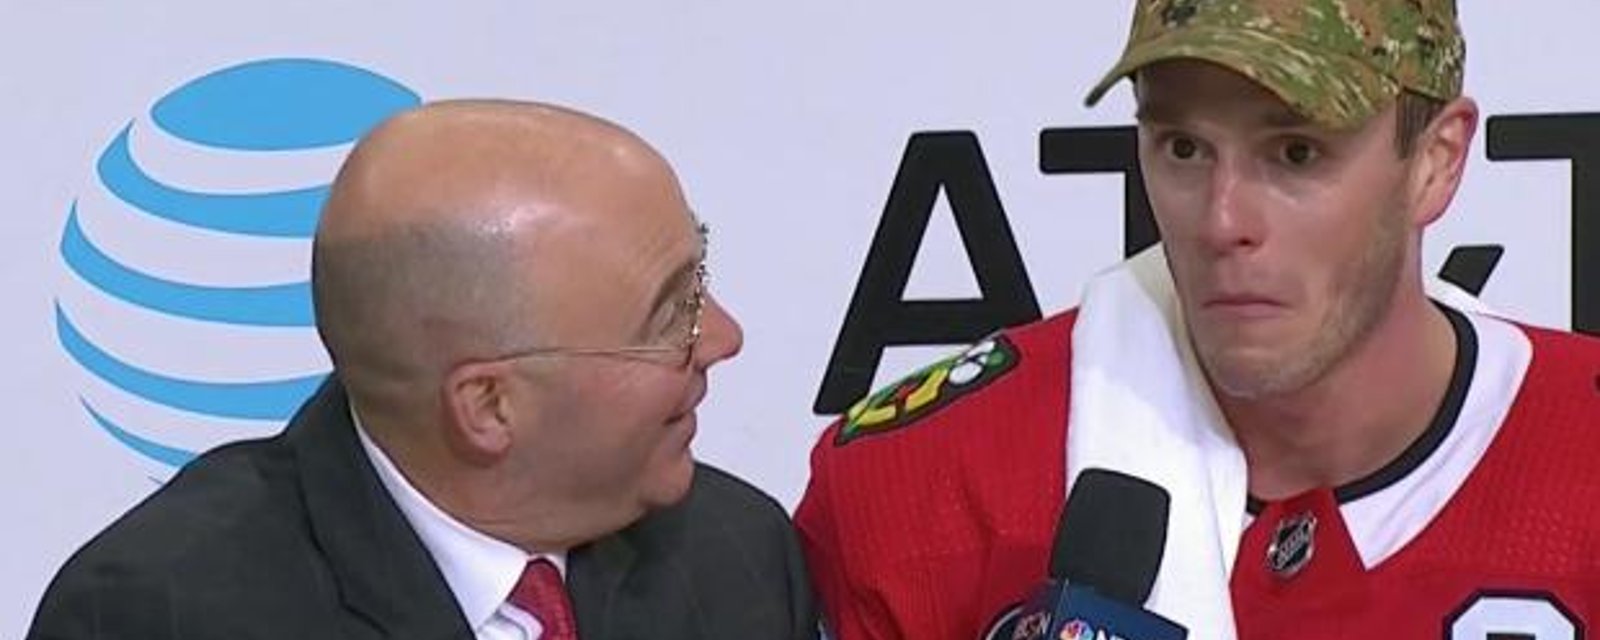 Pierre McGuire has most awkward interview with Toews following Hawks’ win